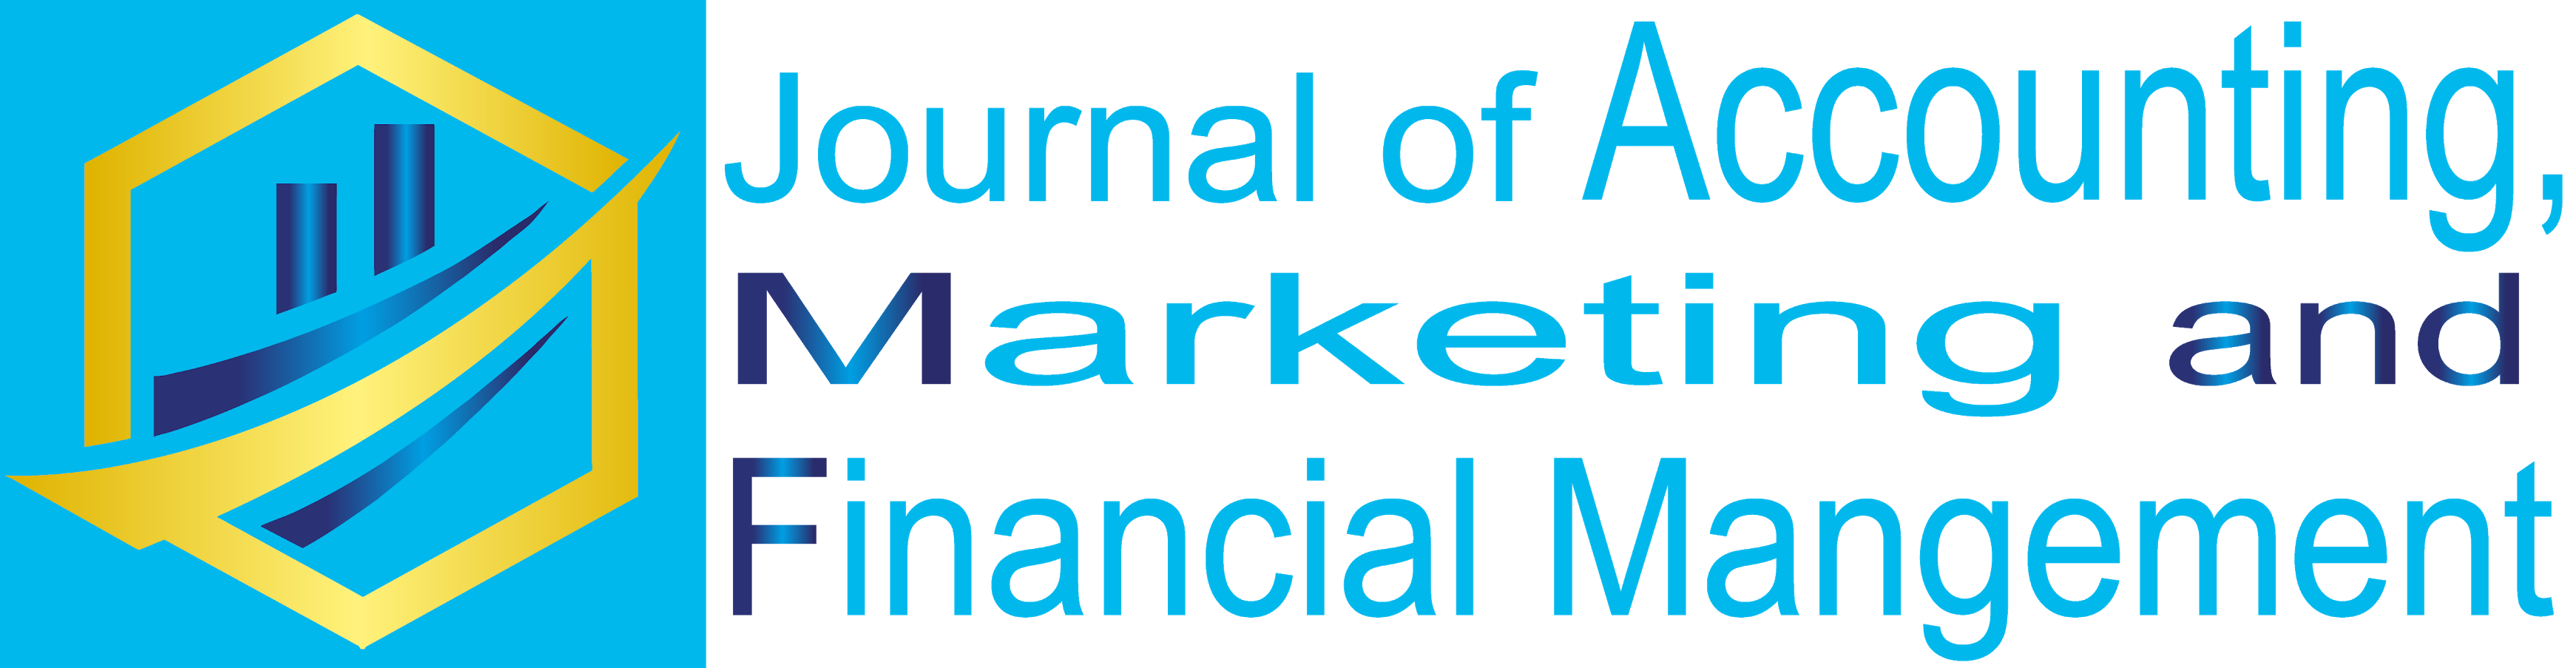 Journal of Accounting, Marketing and Financial Management (JAMFM) 